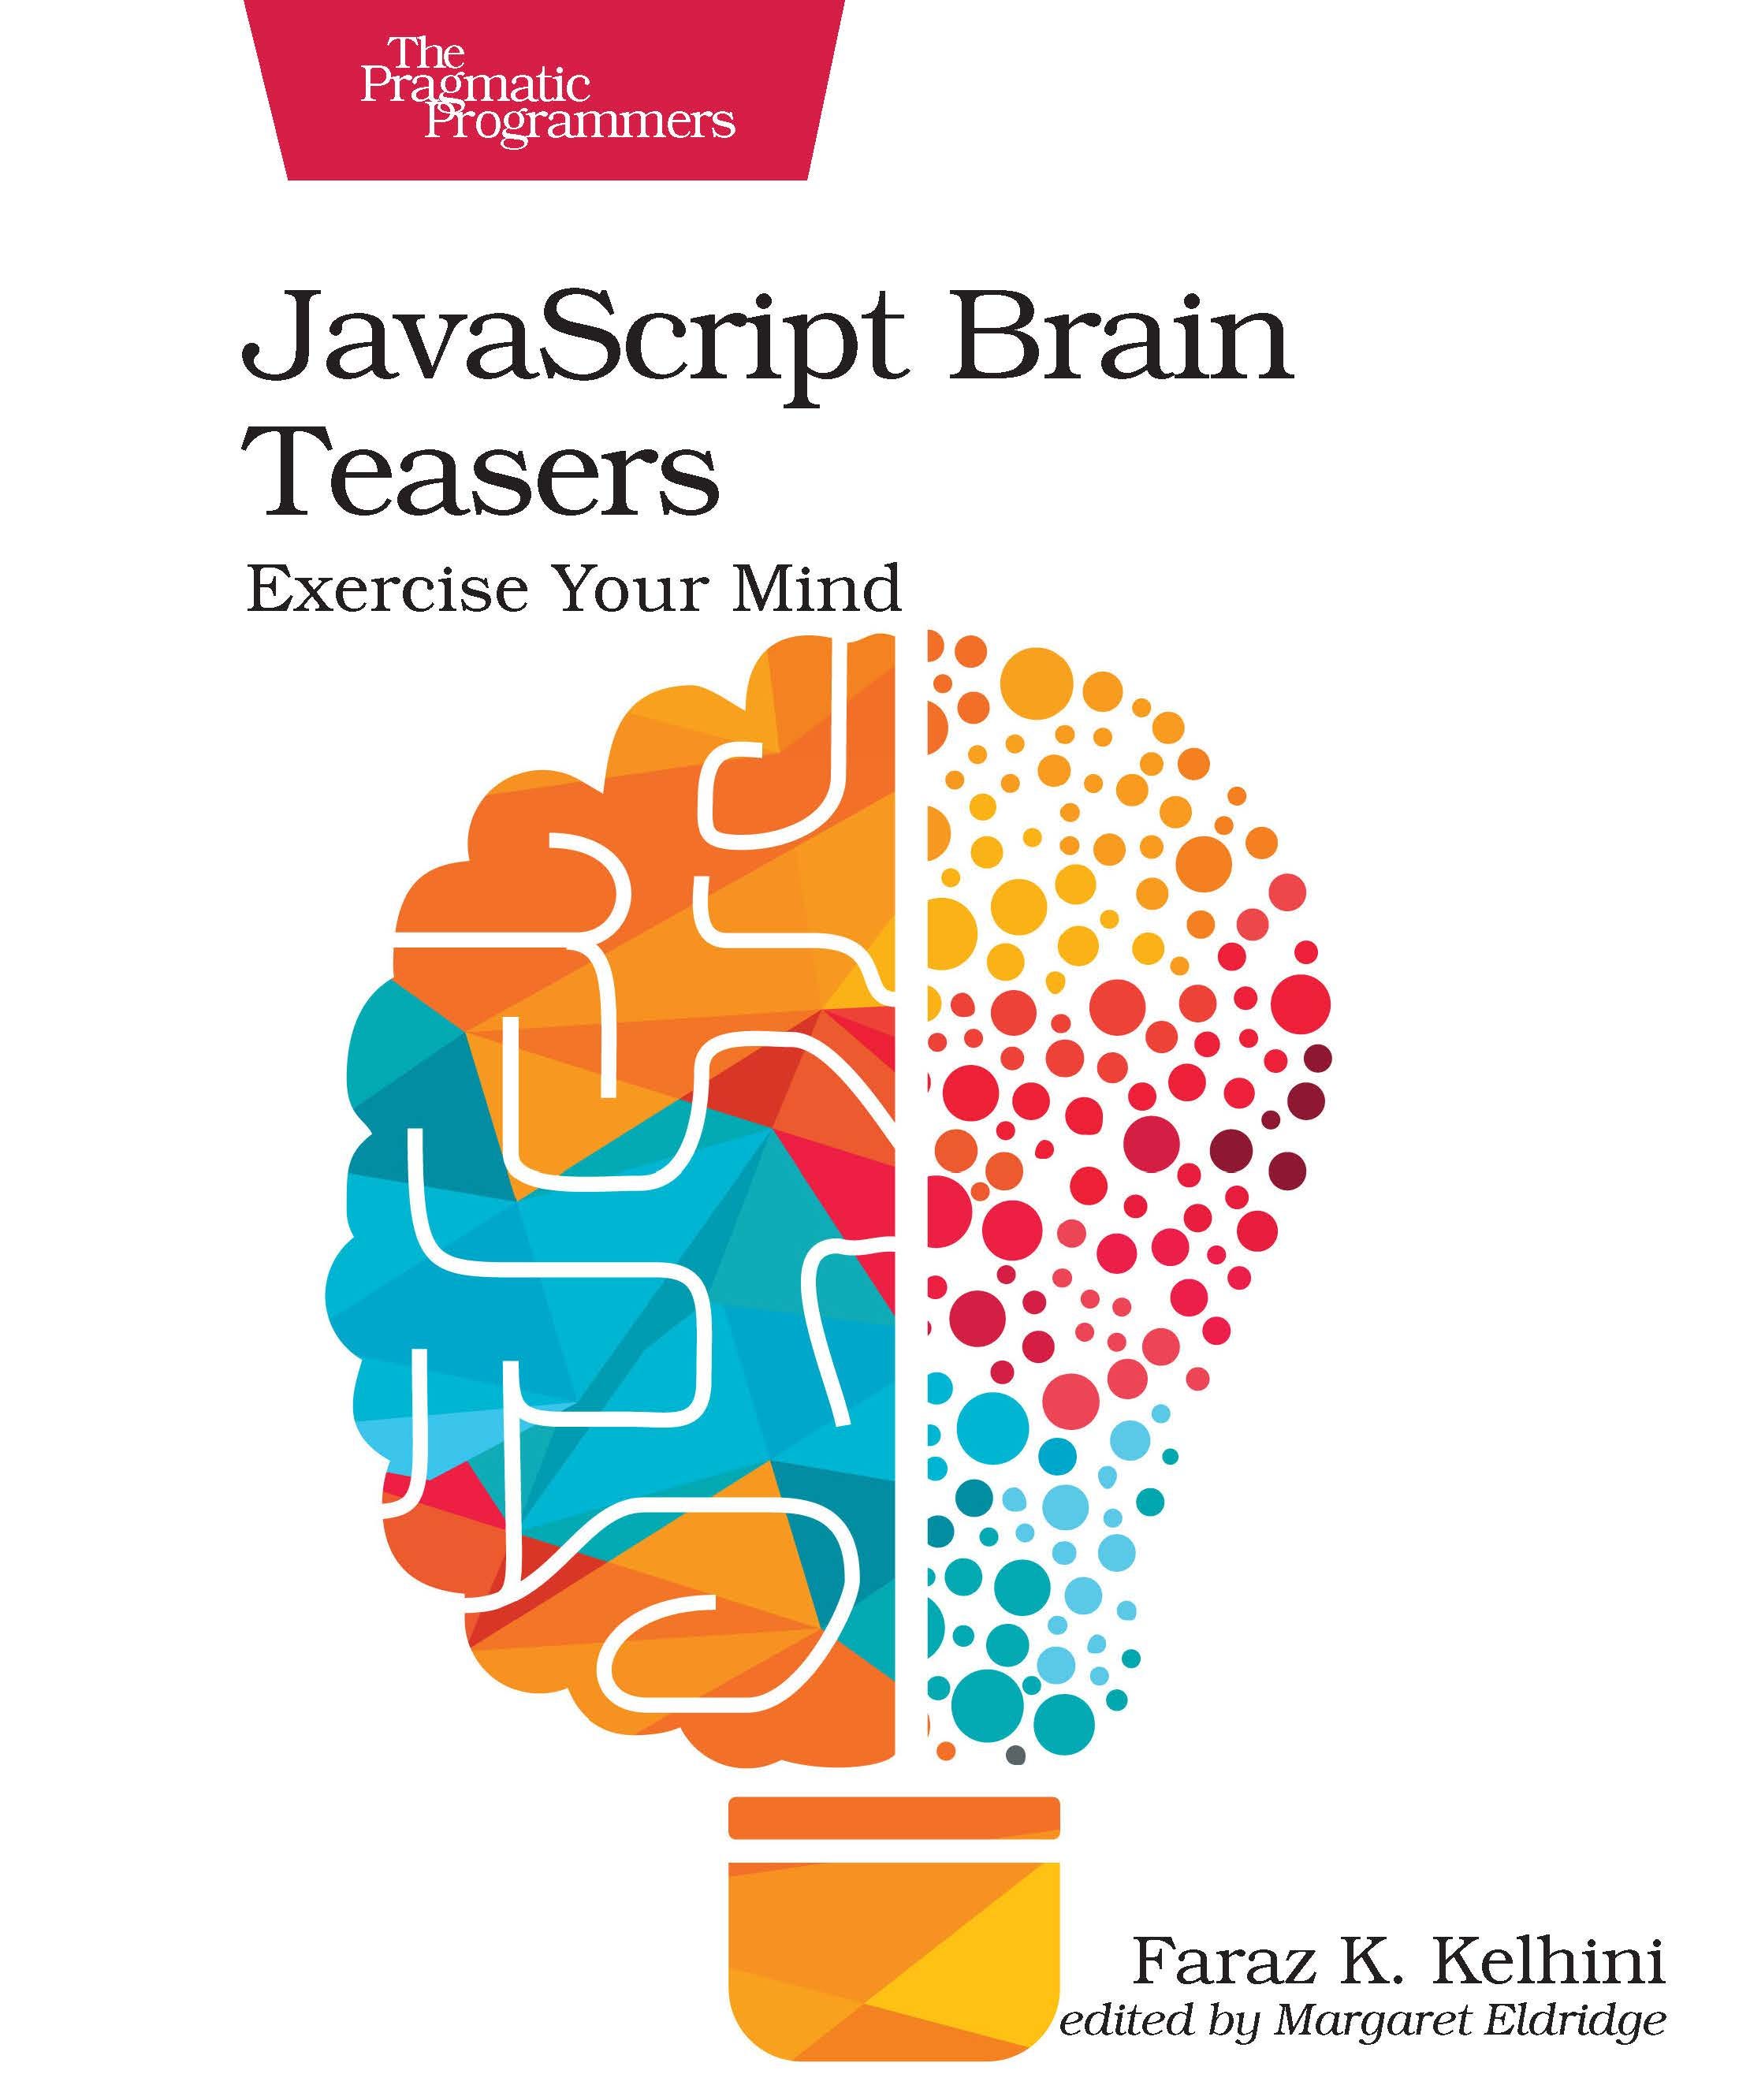 Book cover featuring a colorful illustration of a half-brain, half puzzle